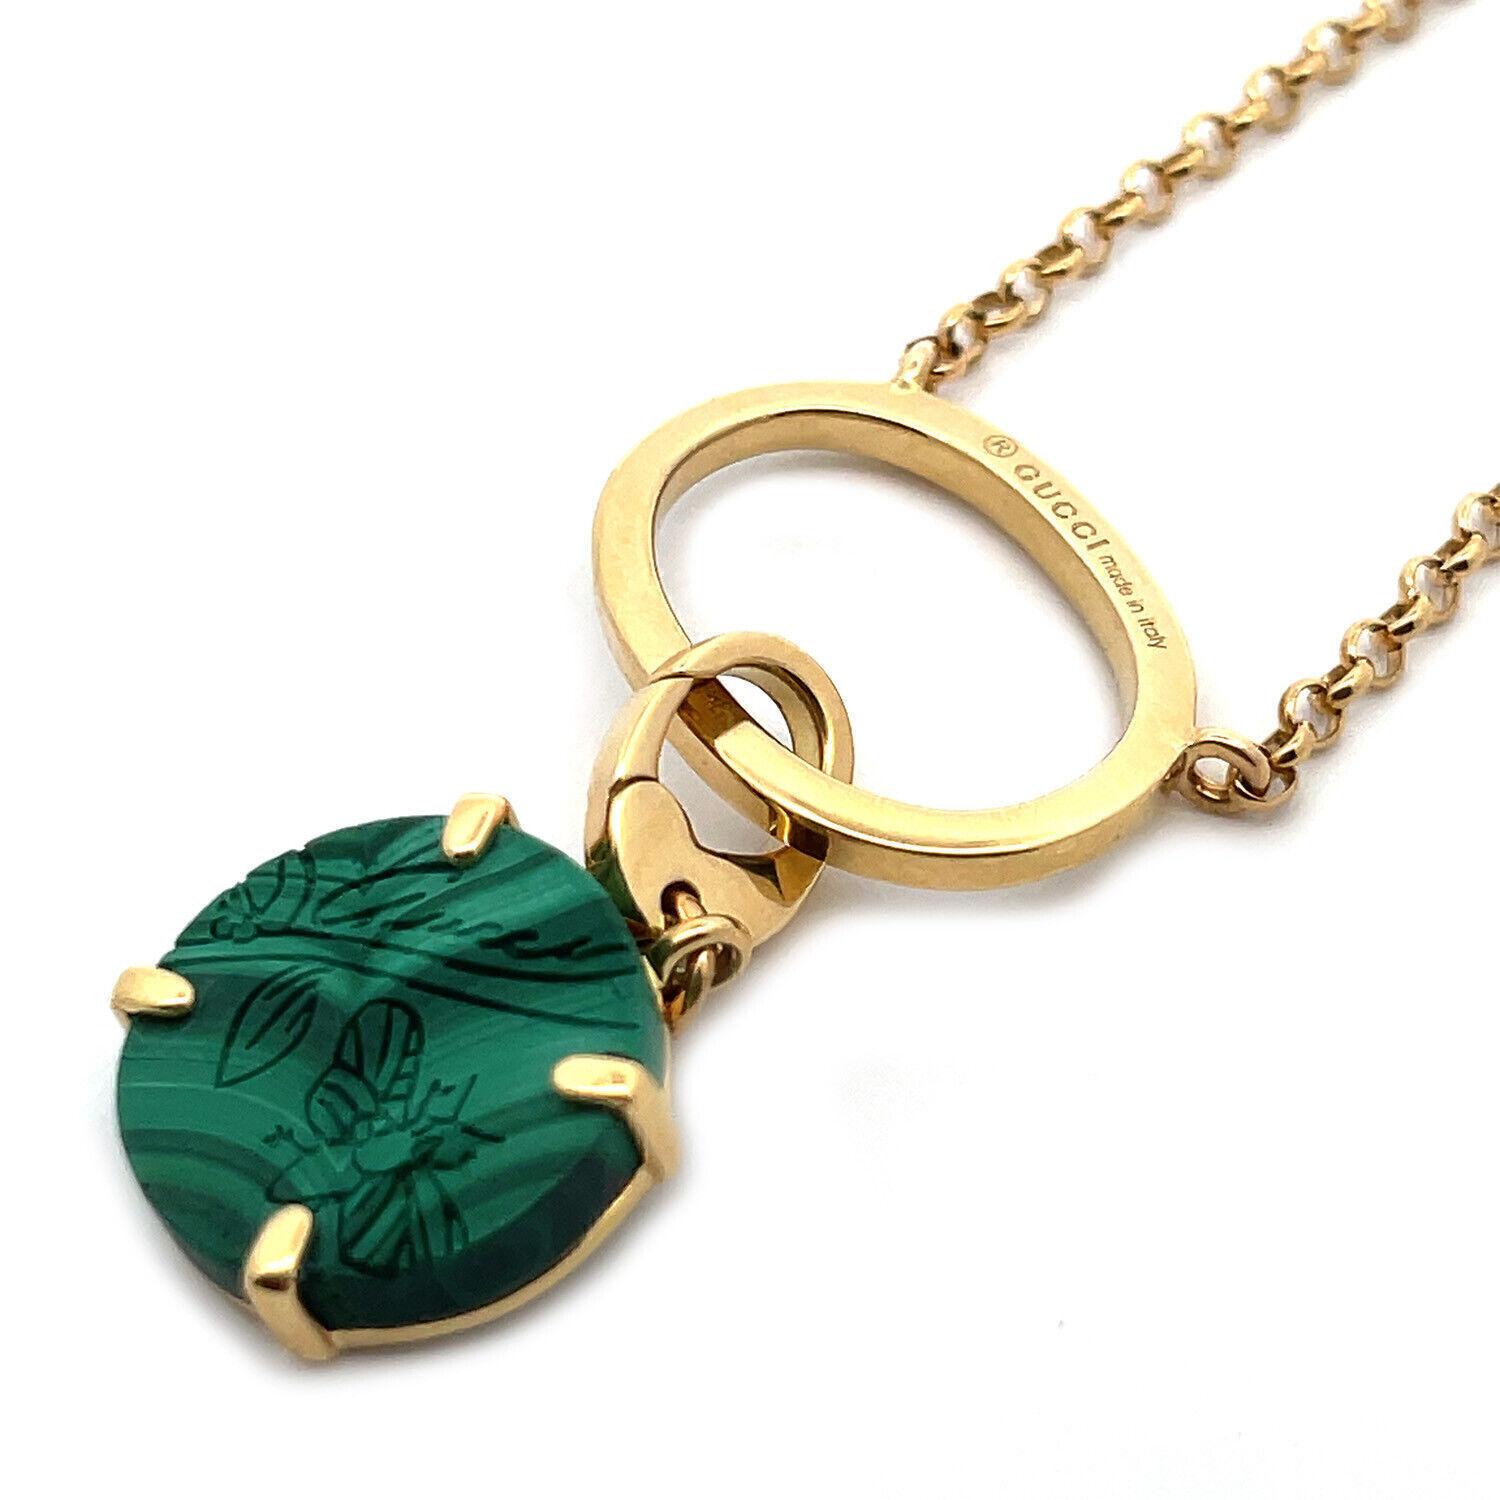 Gucci Malachite 18k Yellow Gold Beetle Necklace  In Excellent Condition For Sale In Boca Raton, FL